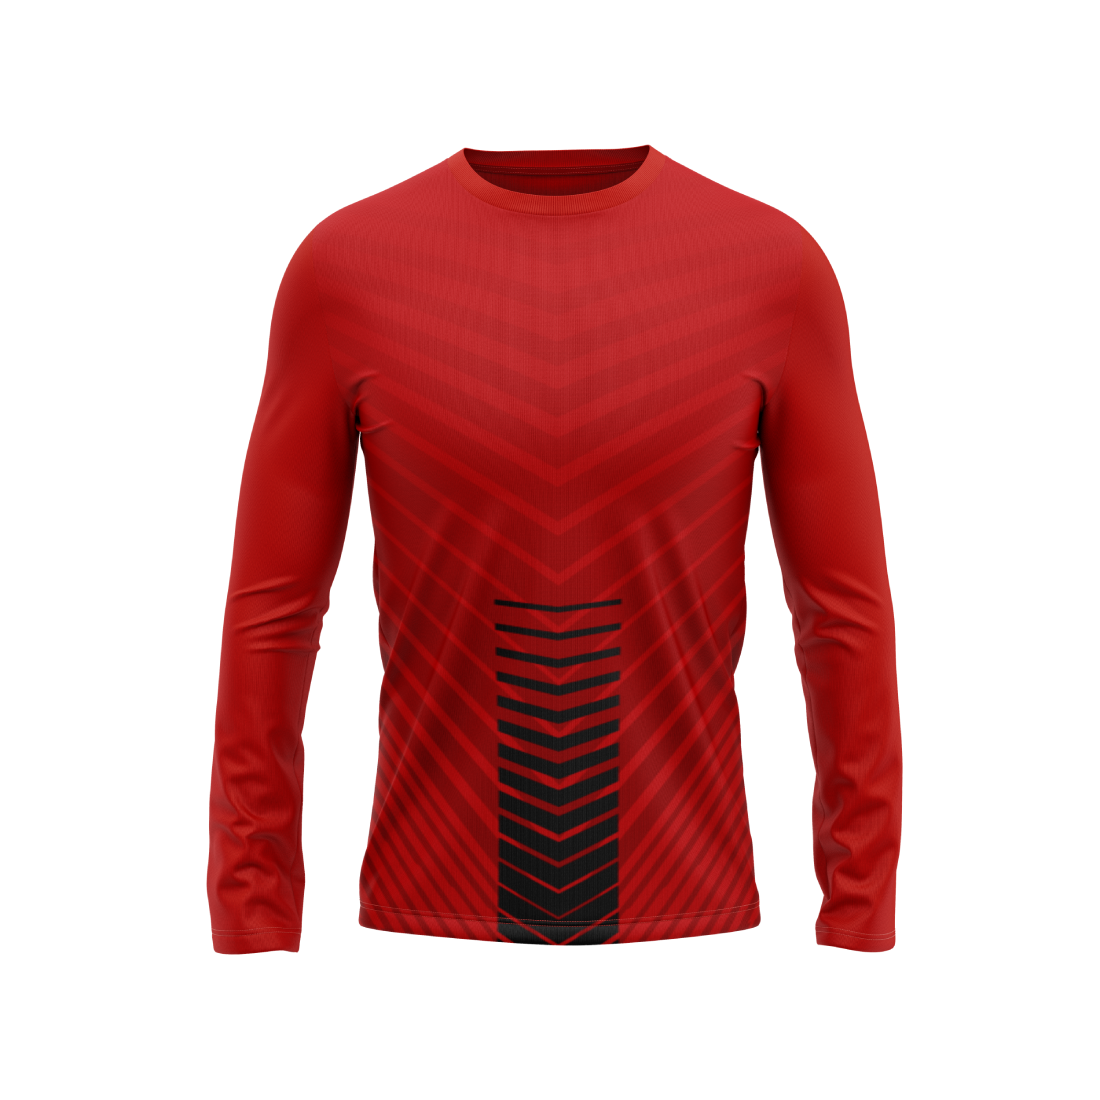 Round Neck Fullsleeve Printed Jersey Red NP50000545